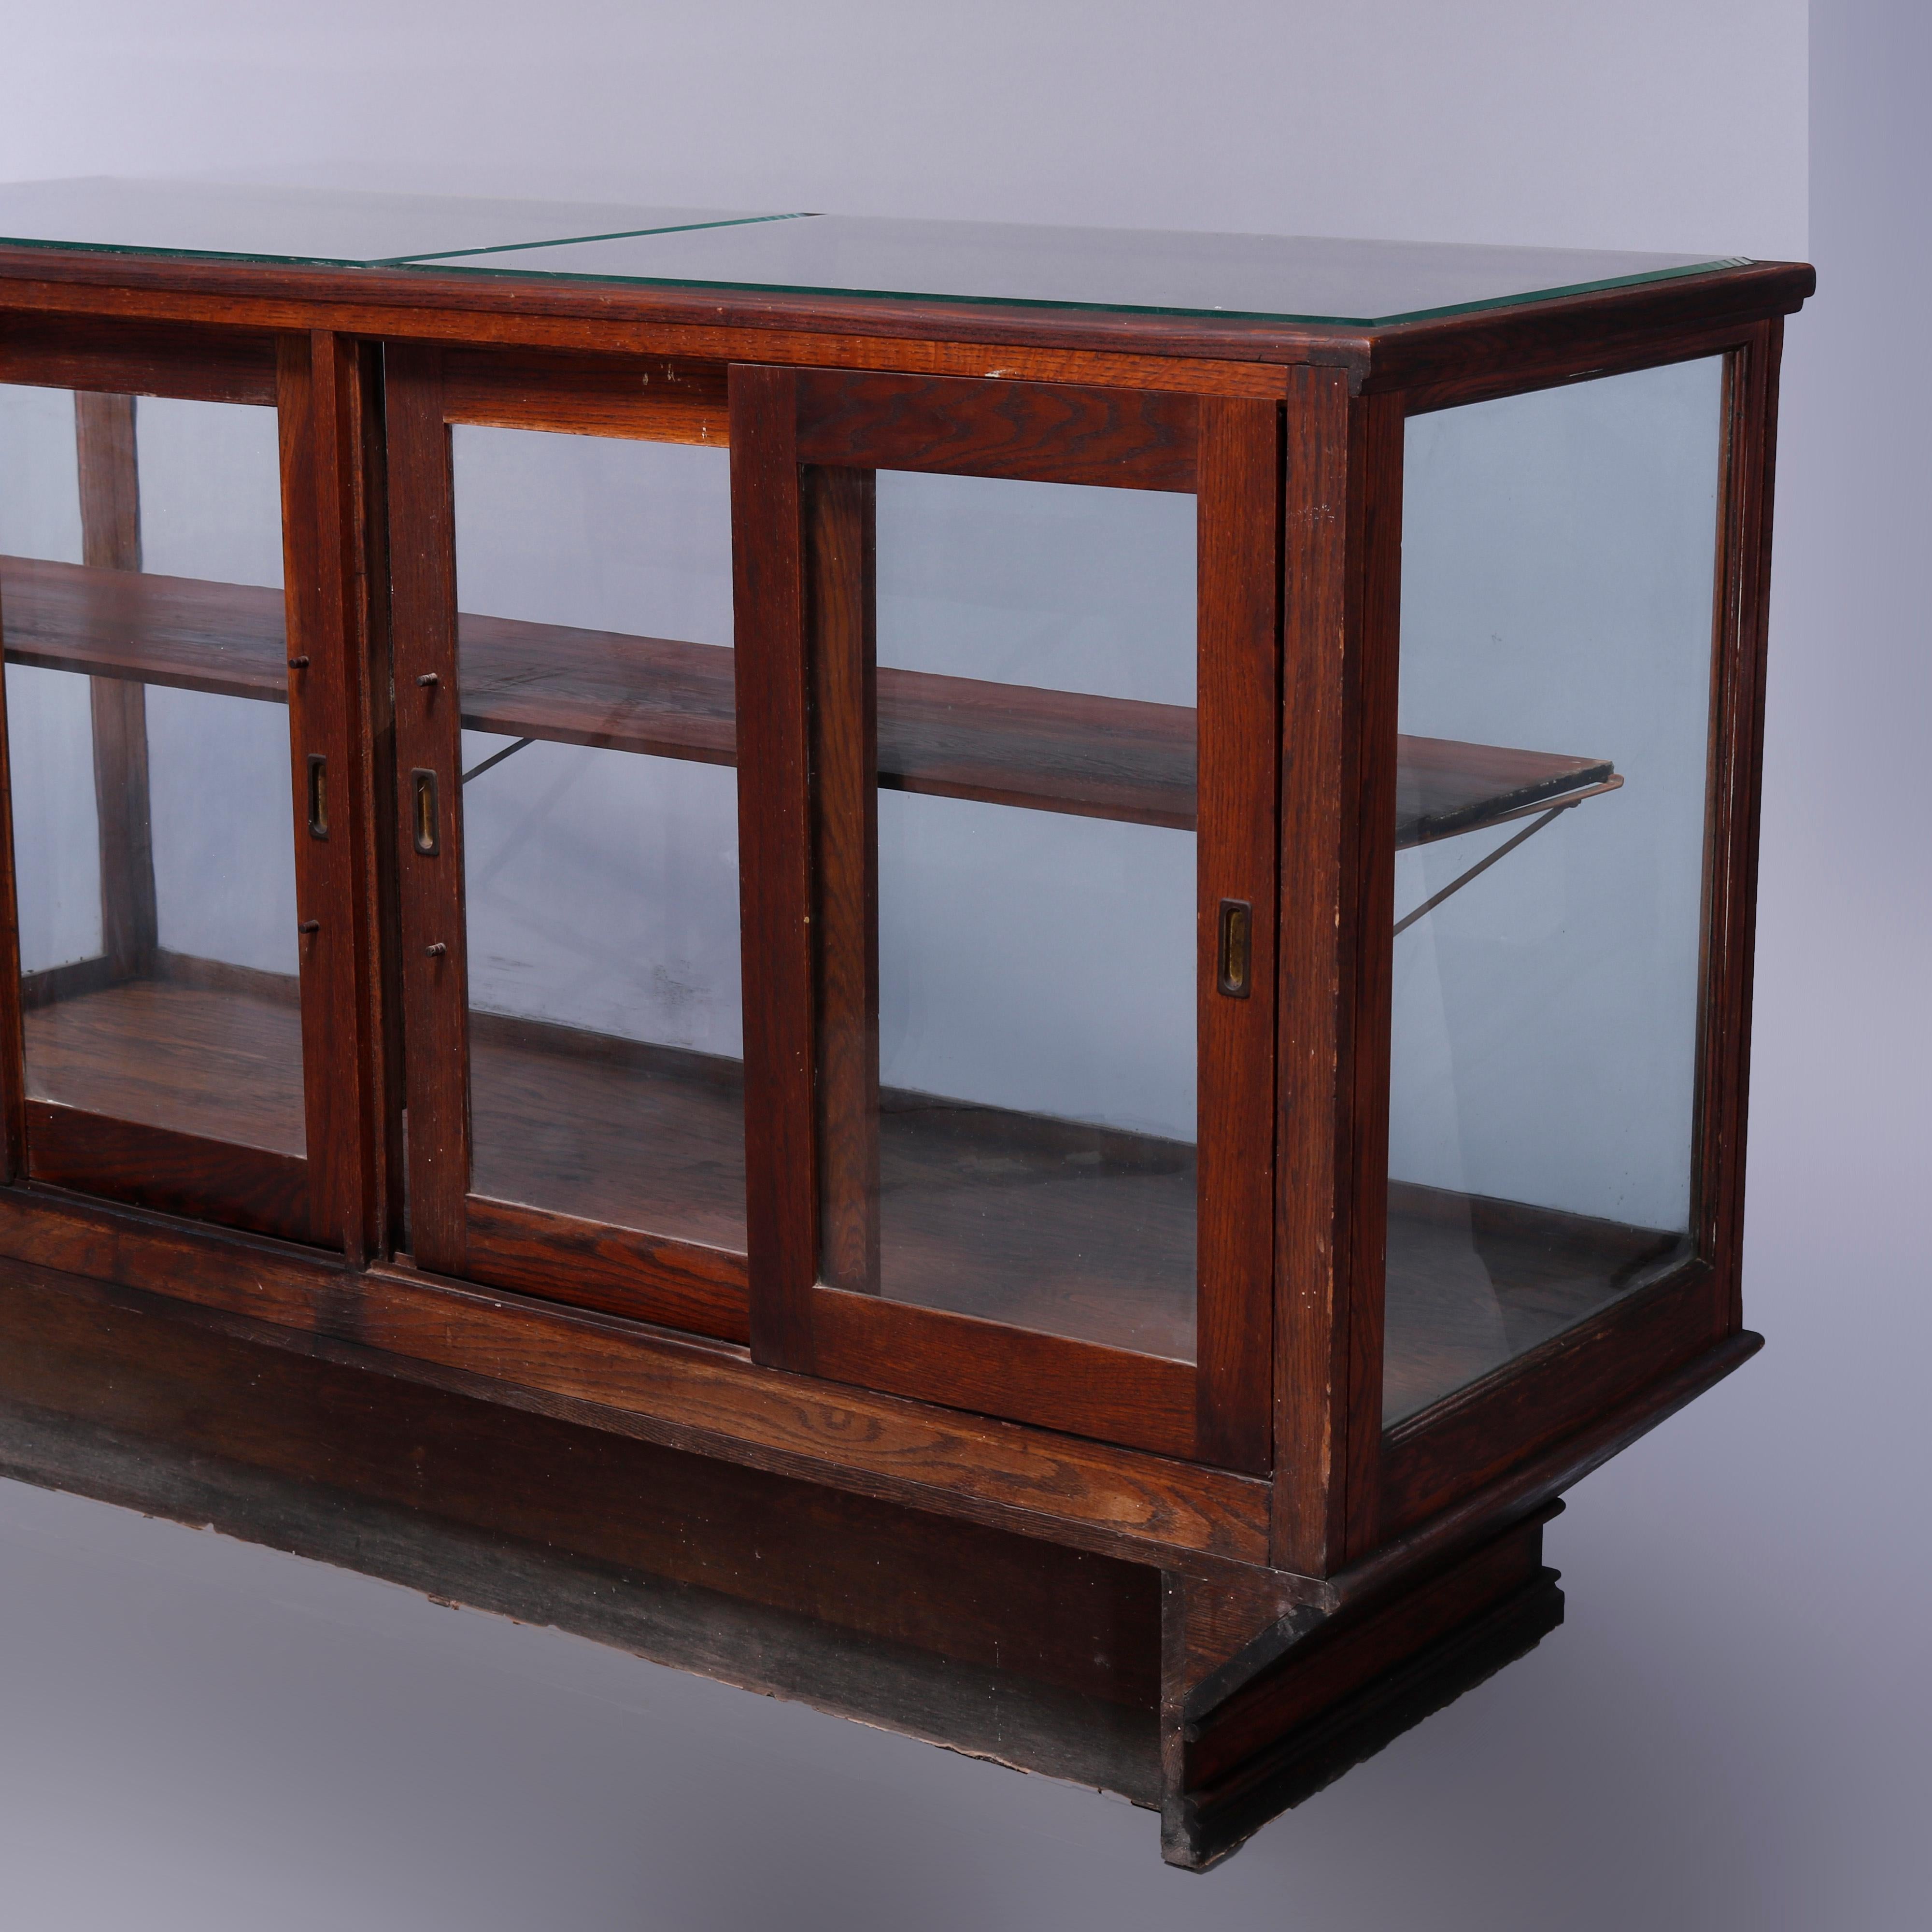 20th Century Antique Oak & Glass Country Store Counter Display Case, circa 1900